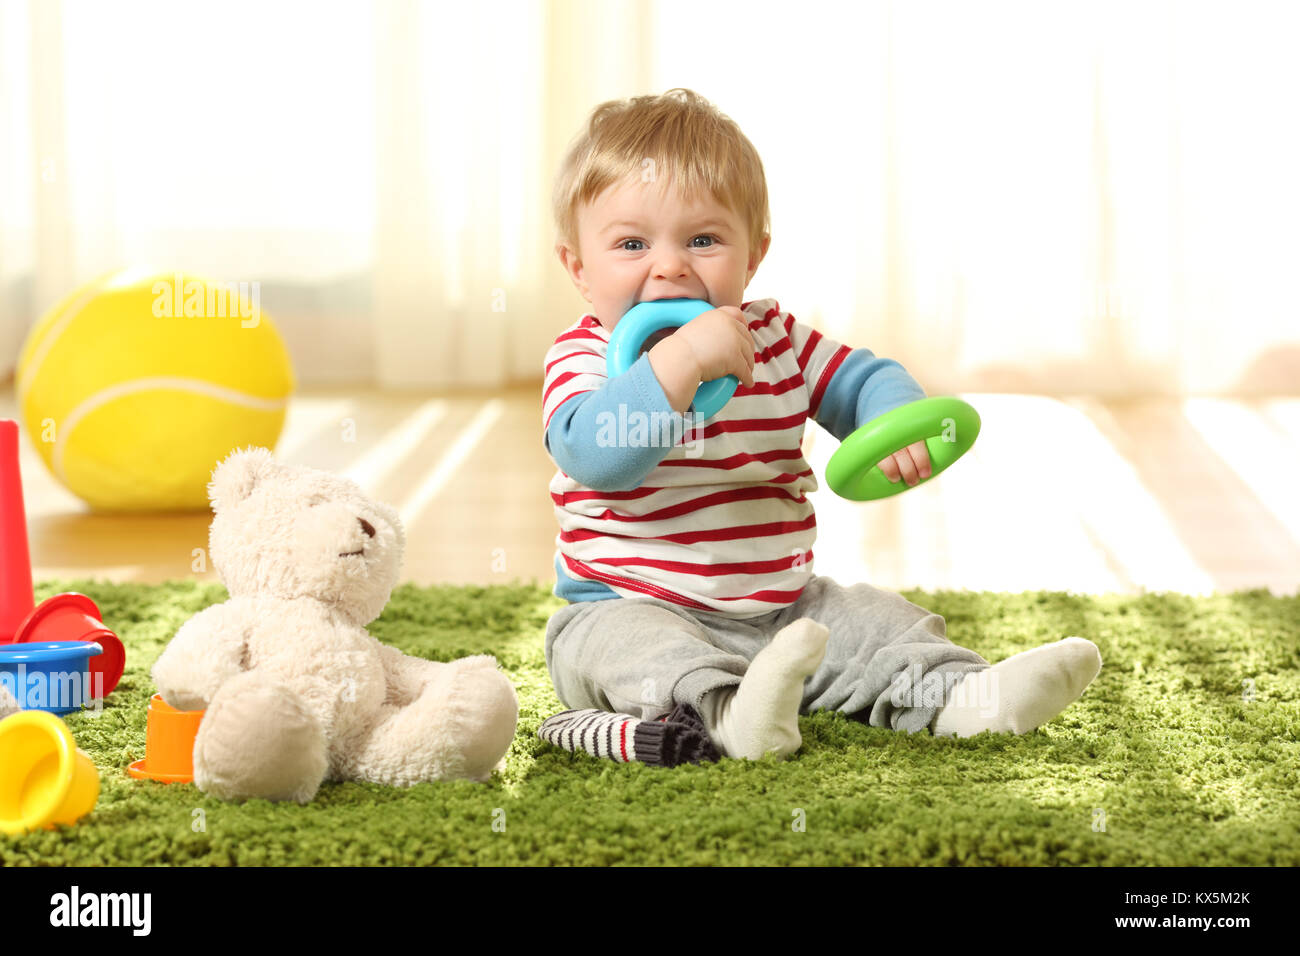 Front view portrait of a happy baby biting toys on a carpet at home Stock Photo